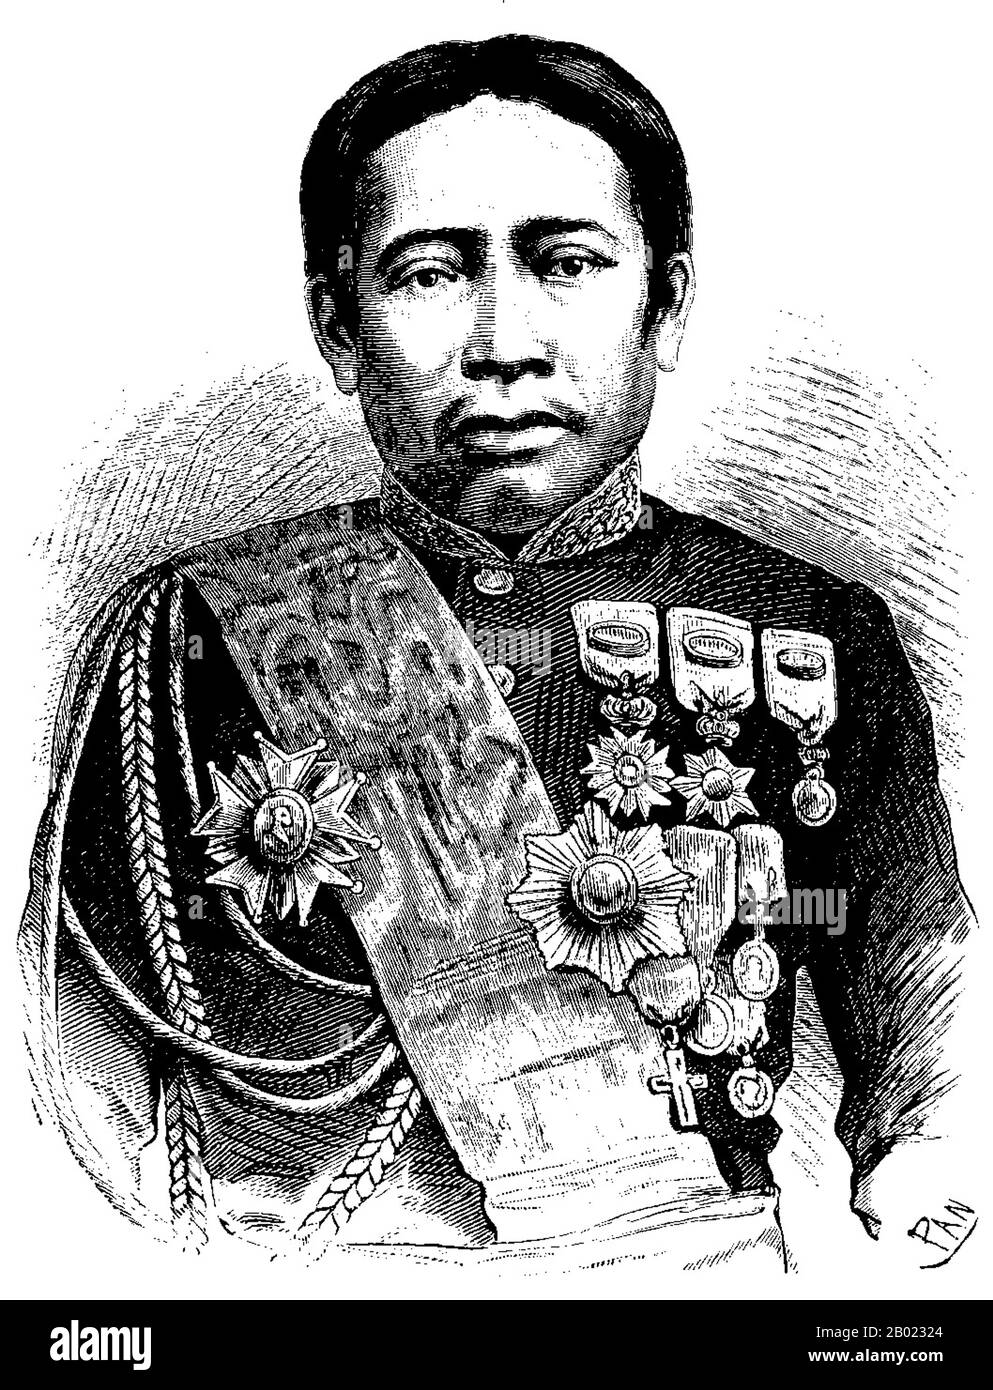 Norodom I ruled as king of Cambodia from 1860 to 1904. He was the eldest son of King Ang Duong, who ruled on behalf of Siam, and half-brother of Prince Si Votha as well as the half-brother of King Sisowath.  Norodom was considered to be the first modern Khmer king. He is credited with saving Cambodia from disappearing altogether. In 1863, to prevent the two powerful neighbours, Vietnam and Siam, from swallowing Cambodia altogether he invited France to make Cambodia its protectorate. Stock Photo